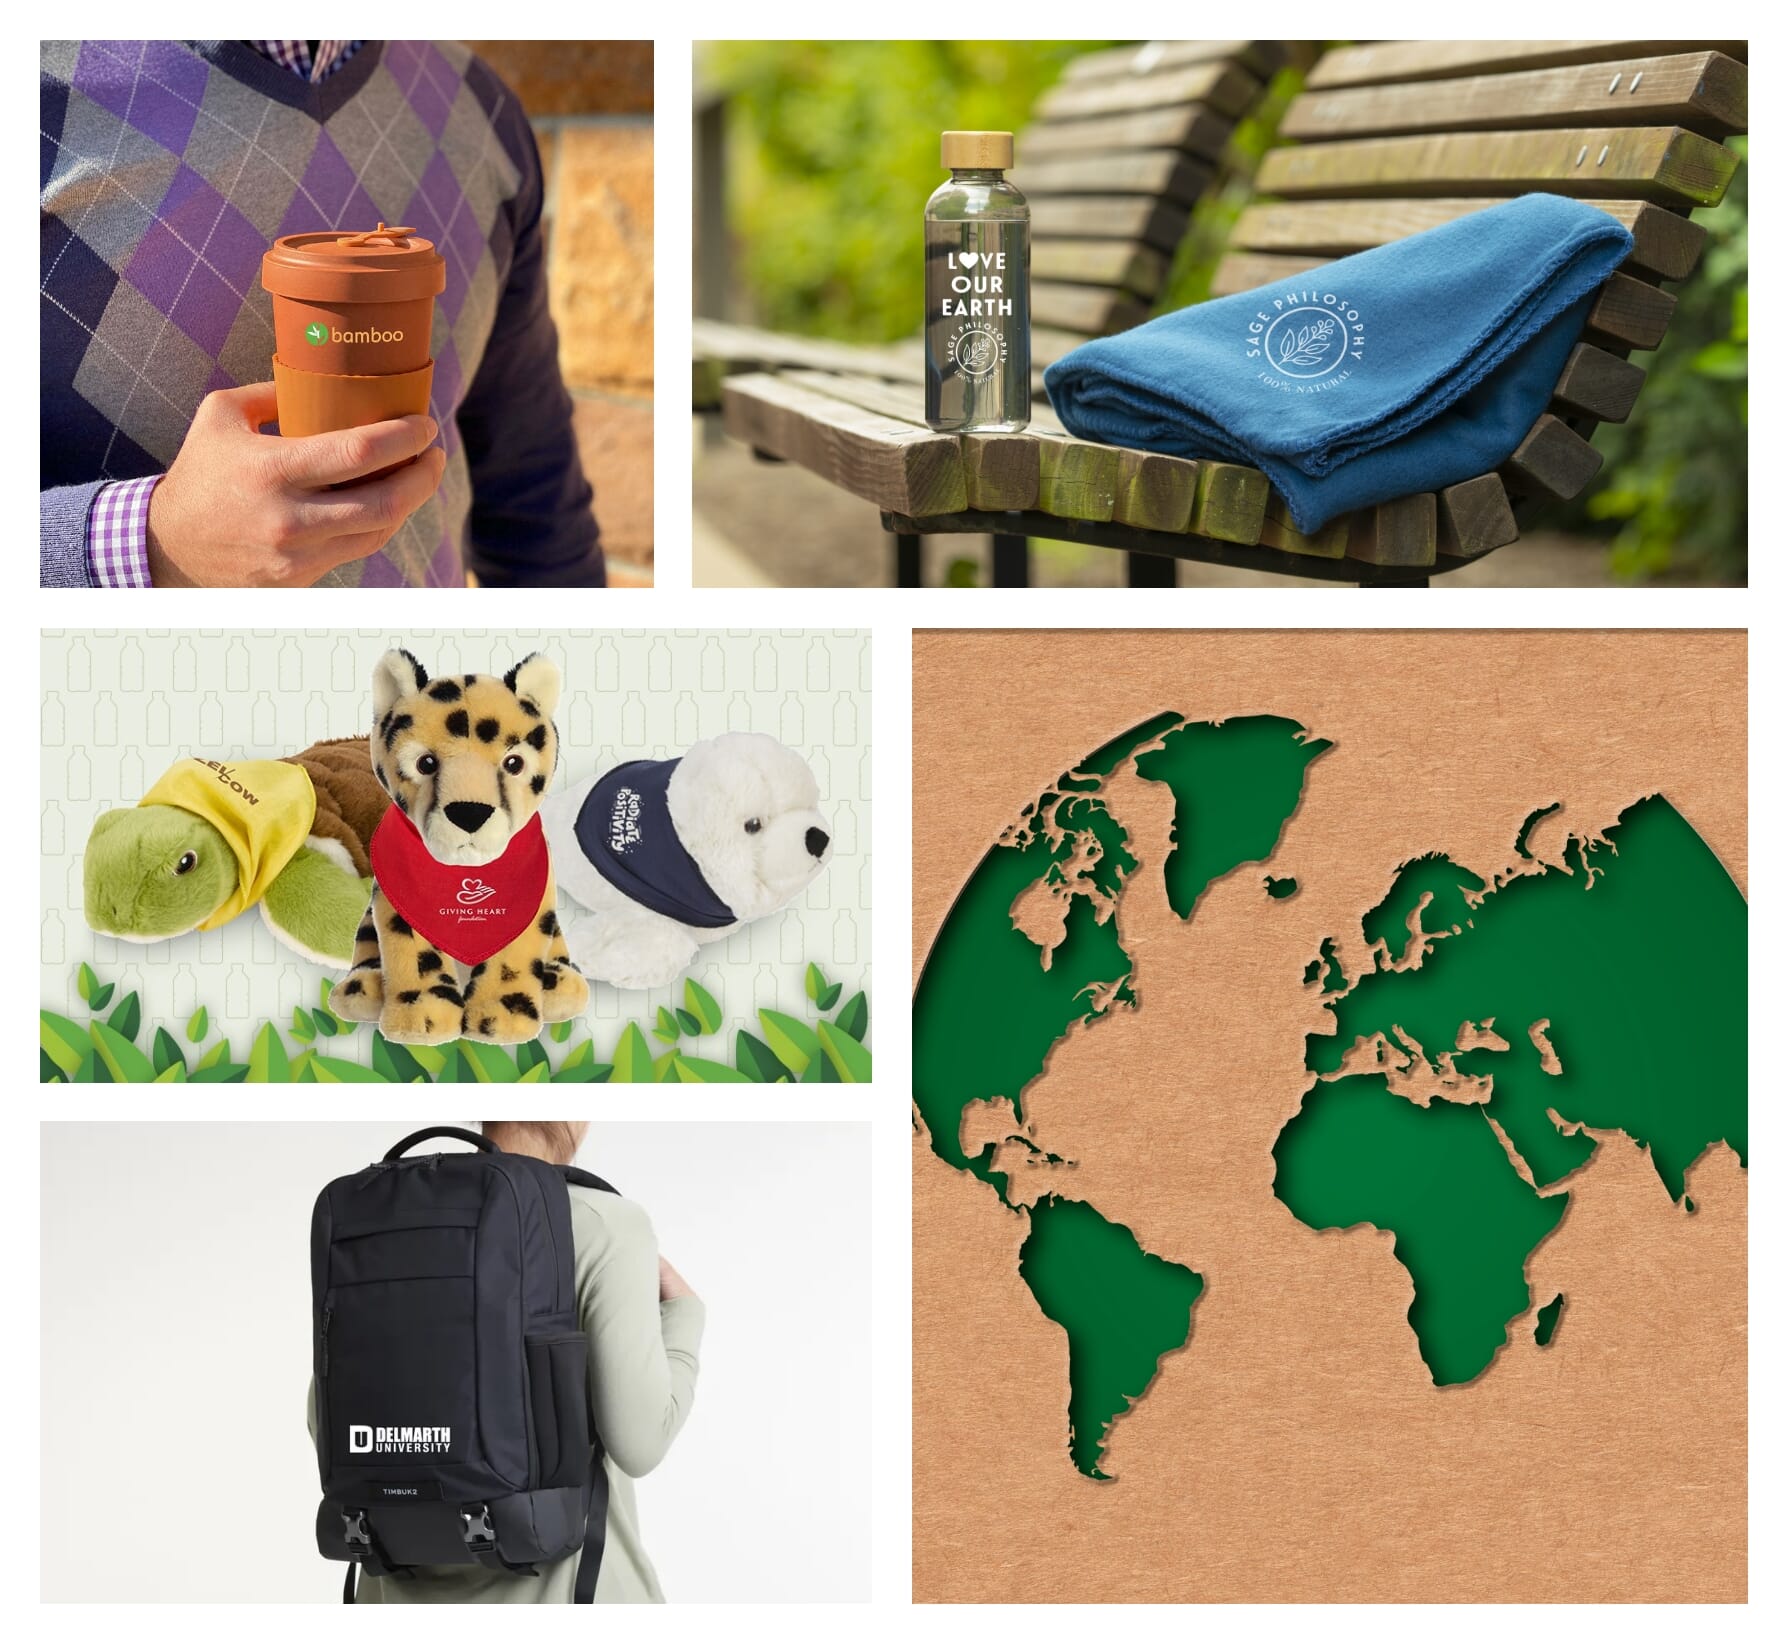 Earth day gifts